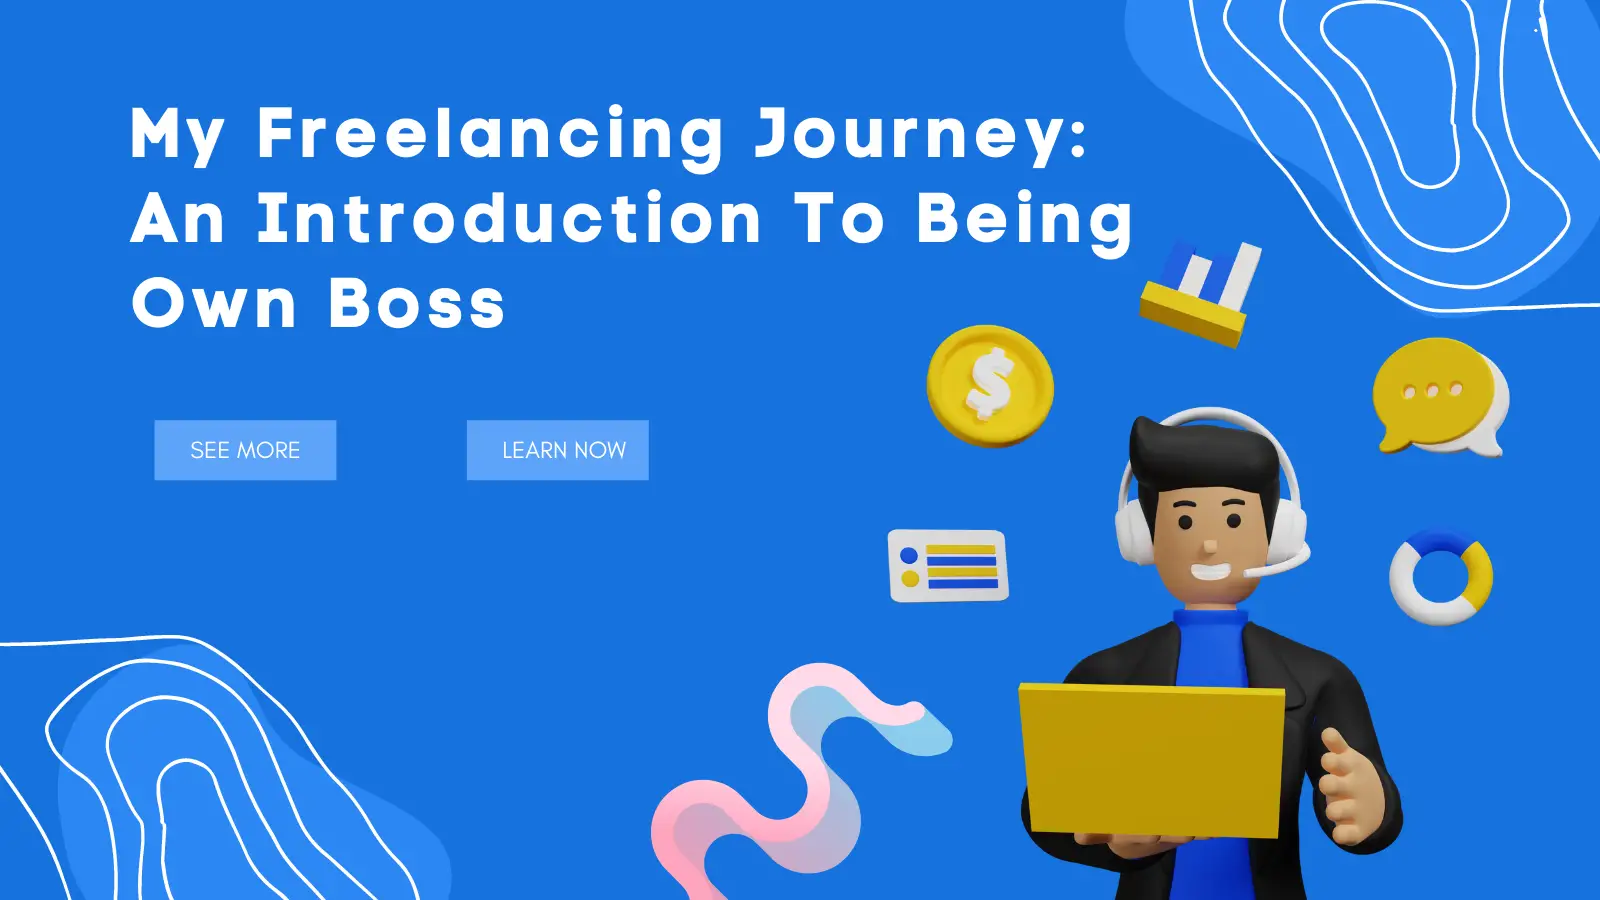 My Freelancing Journey: An Introduction To Being Own Boss